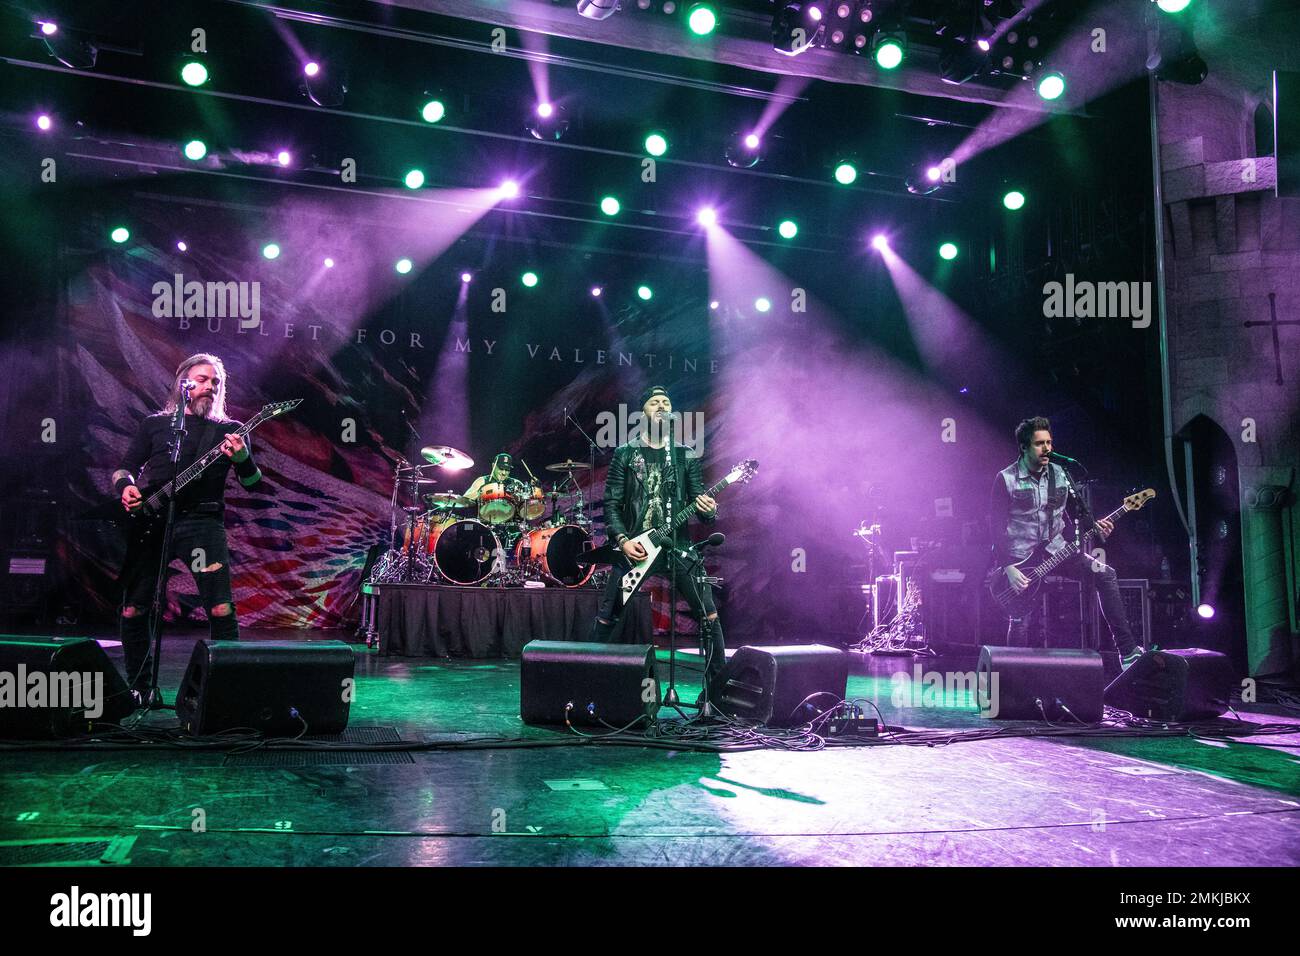 https://c8.alamy.com/comp/2MKJBKX/matthew-tuck-from-left-michael-paget-jamie-mathias-and-jason-bowld-of-bullet-for-my-valentine-perform-on-board-the-carnival-valor-during-day-1-of-the-shiprocked-cruise-on-sunday-jan-27-2019-photo-by-amy-harrisinvisionap-2MKJBKX.jpg